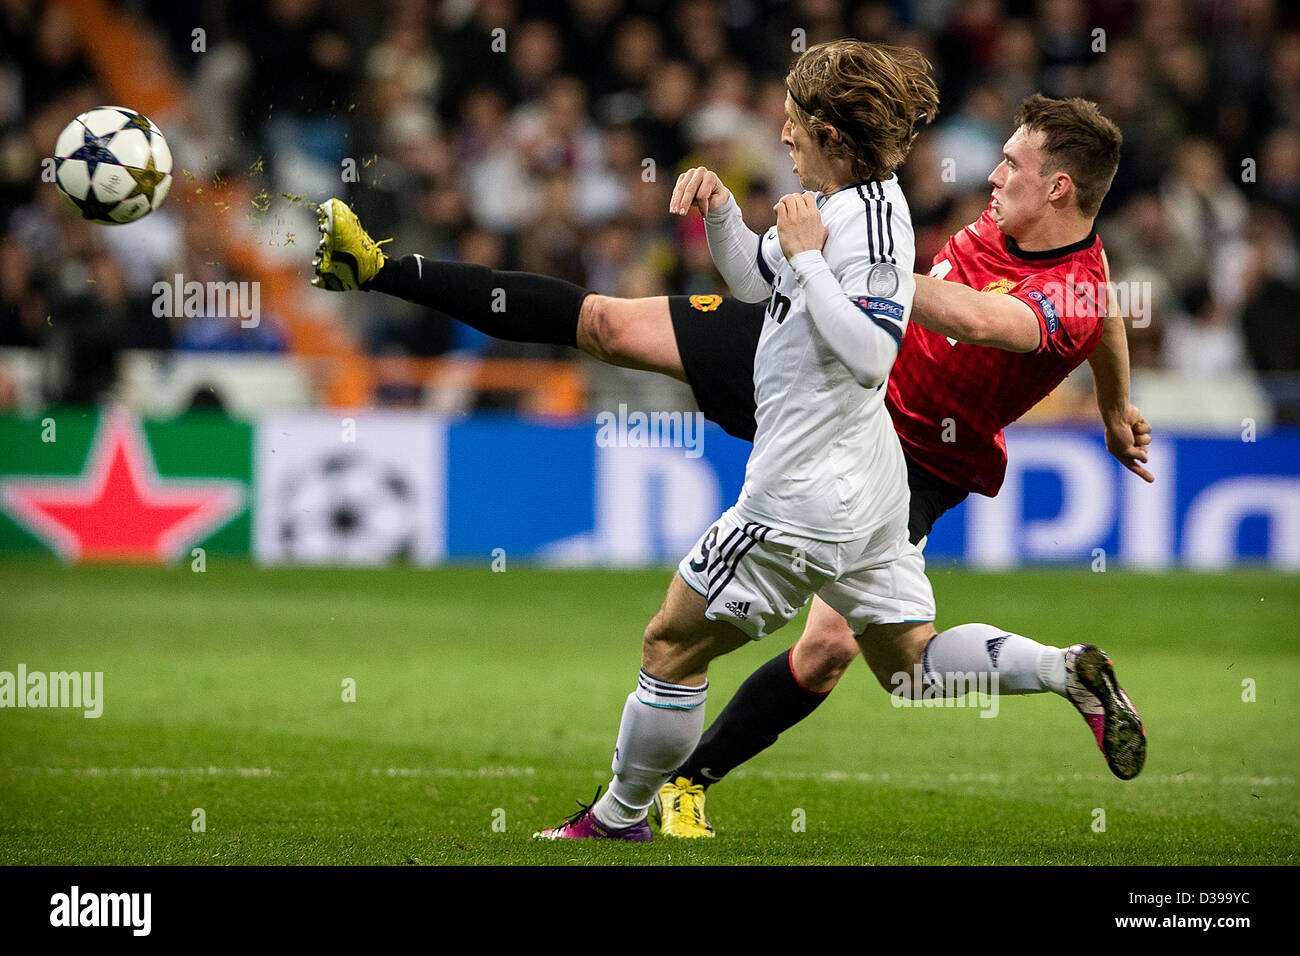 Madrid, Spain. 13th February 2013.   Defender Phil Jones of Manchester United (R) clears the ball away in the presence of  Midfielder Luka Modric of Real Madridduring the Champions League game between Real Madrid and Manchester United Saint Germain from the Mestalla Stadium. Credit:  Action Plus Sports Images / Alamy Live News Stock Photo